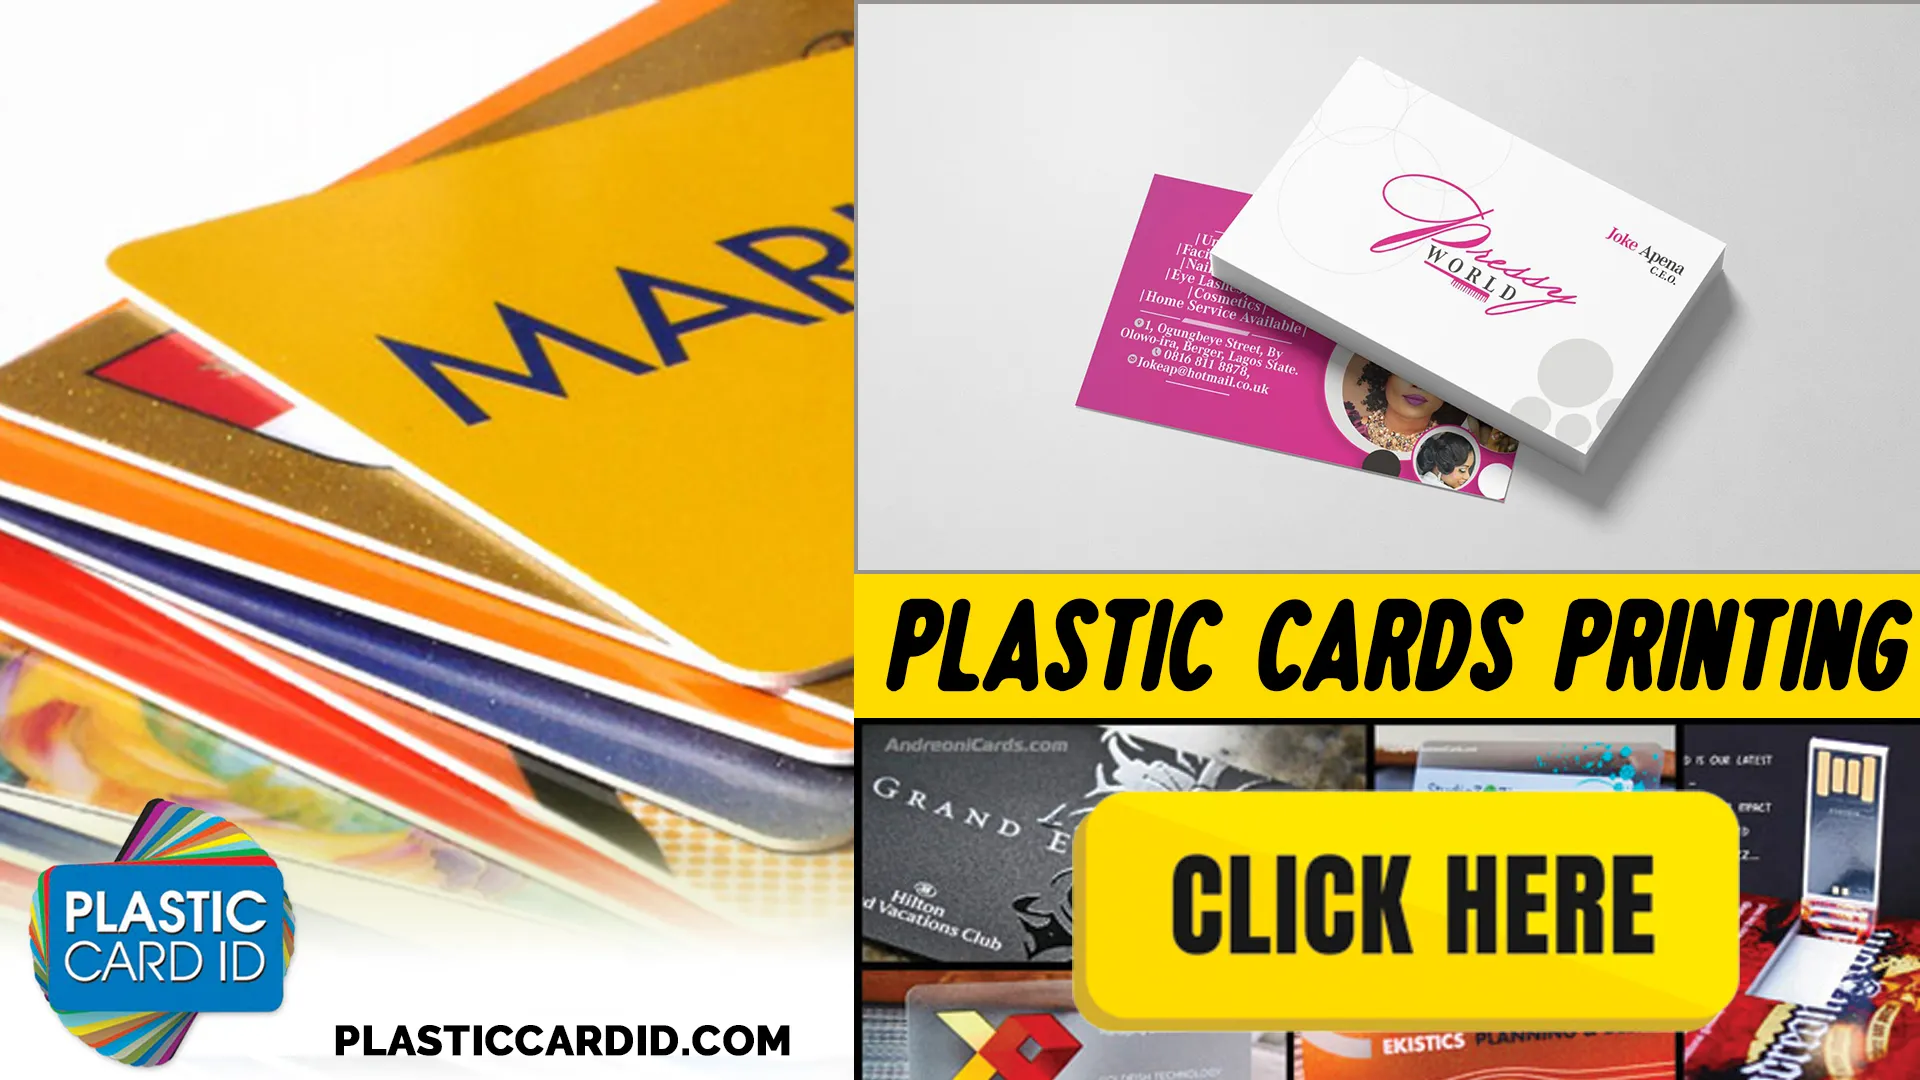 Enhancing Customer Loyalty with Plastic Cards